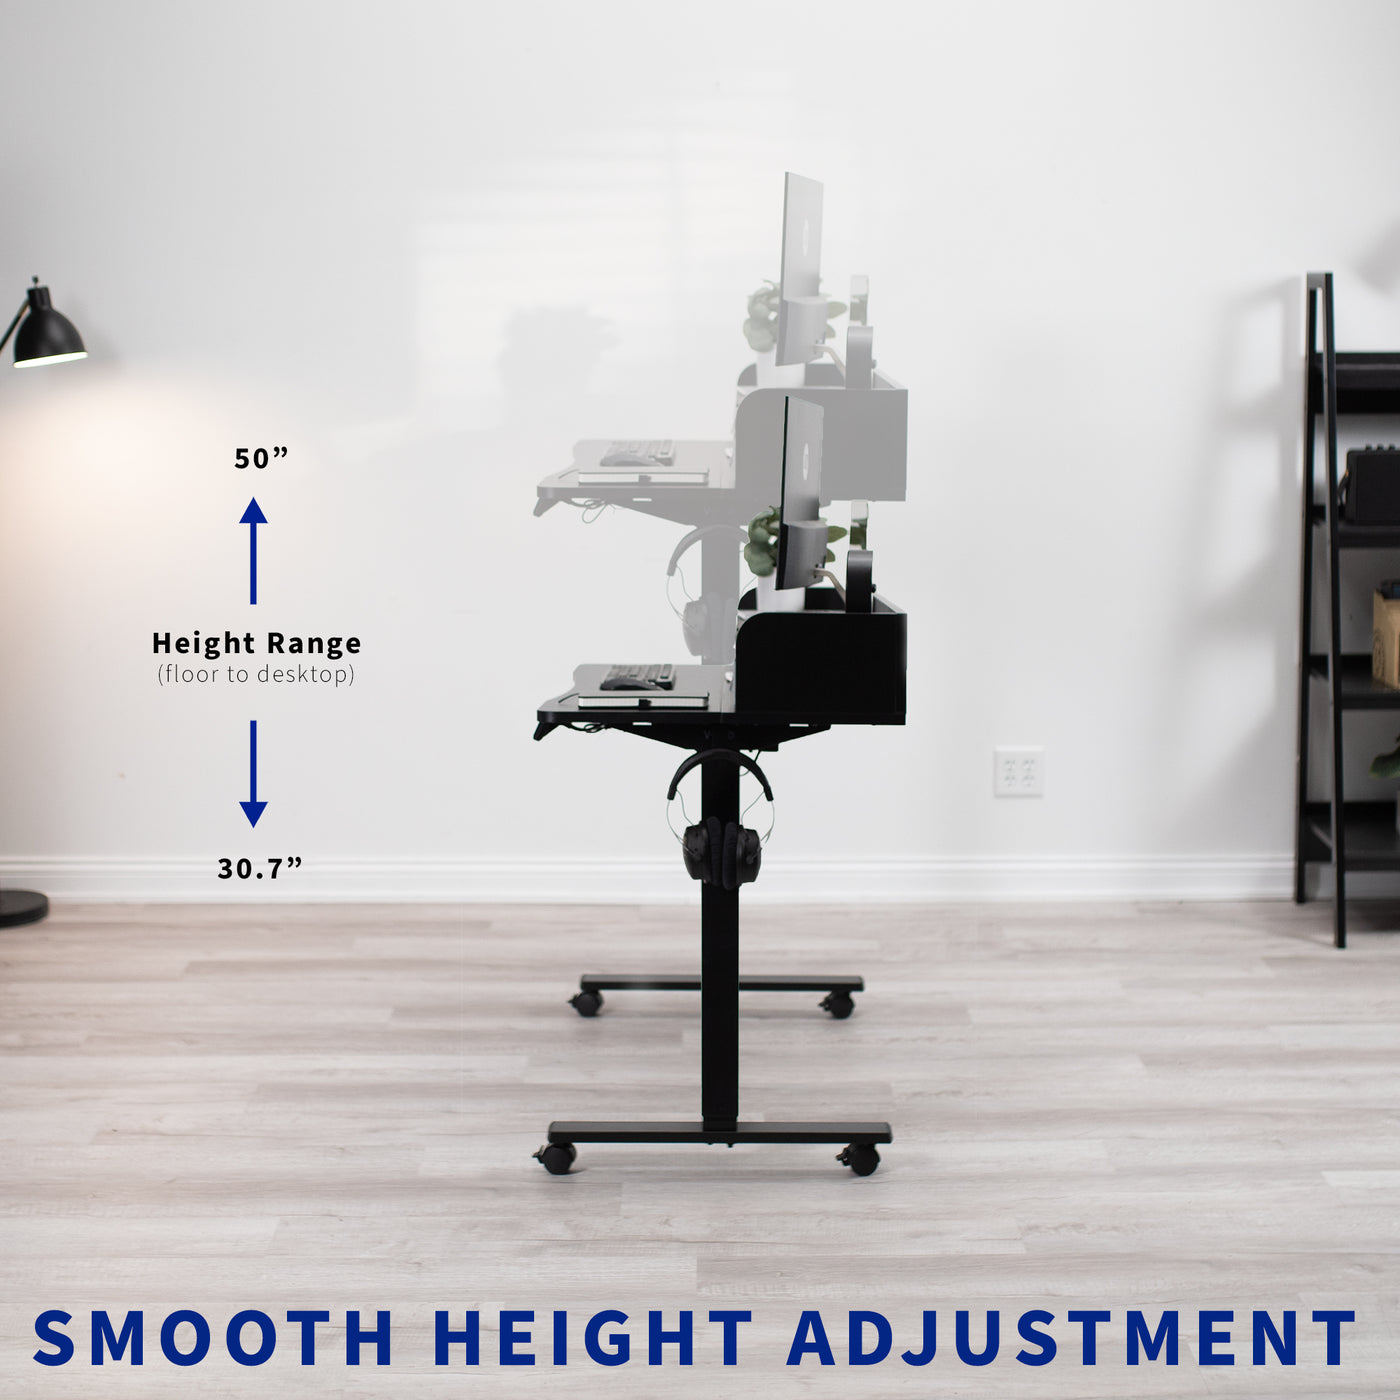 Smooth height adjustments for an ergonomic work environment.